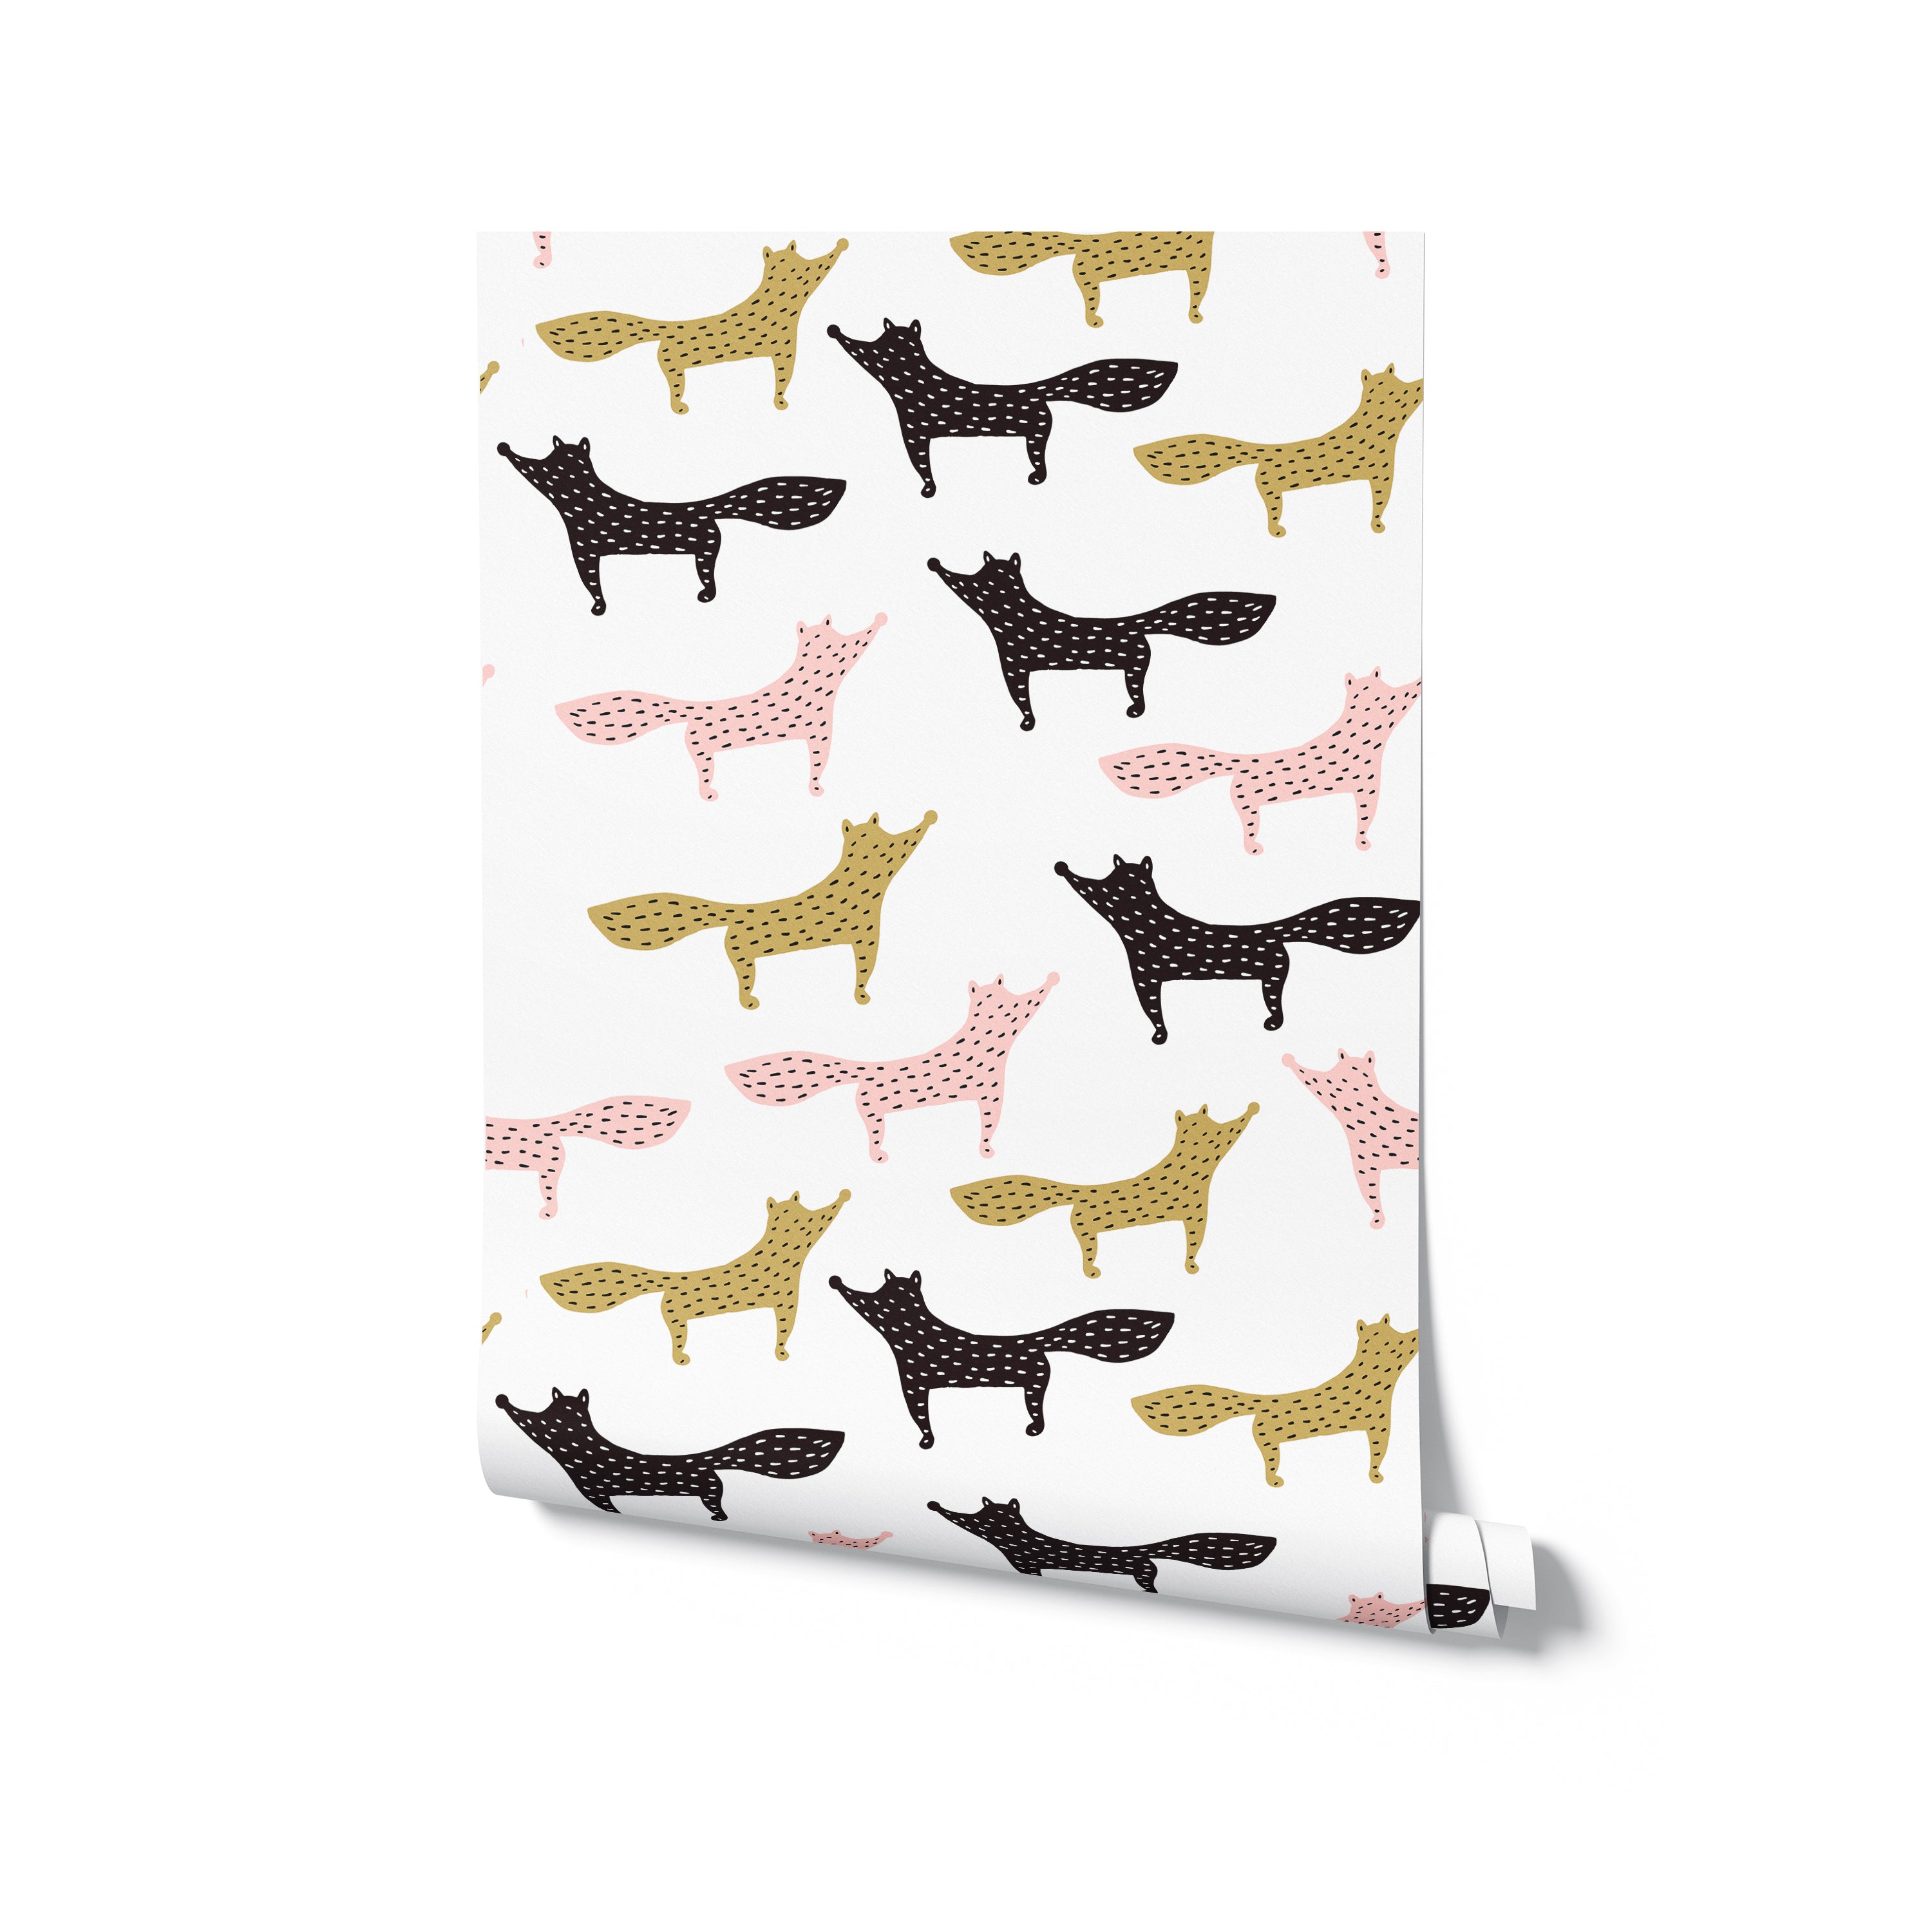 A rolled sample of Foxes Wallpaper showcasing an array of cheerful foxes in pink, yellow, and black with polka dot patterns. This whimsical wallpaper is ideal for adding a touch of fun and creativity to any child's room or play area